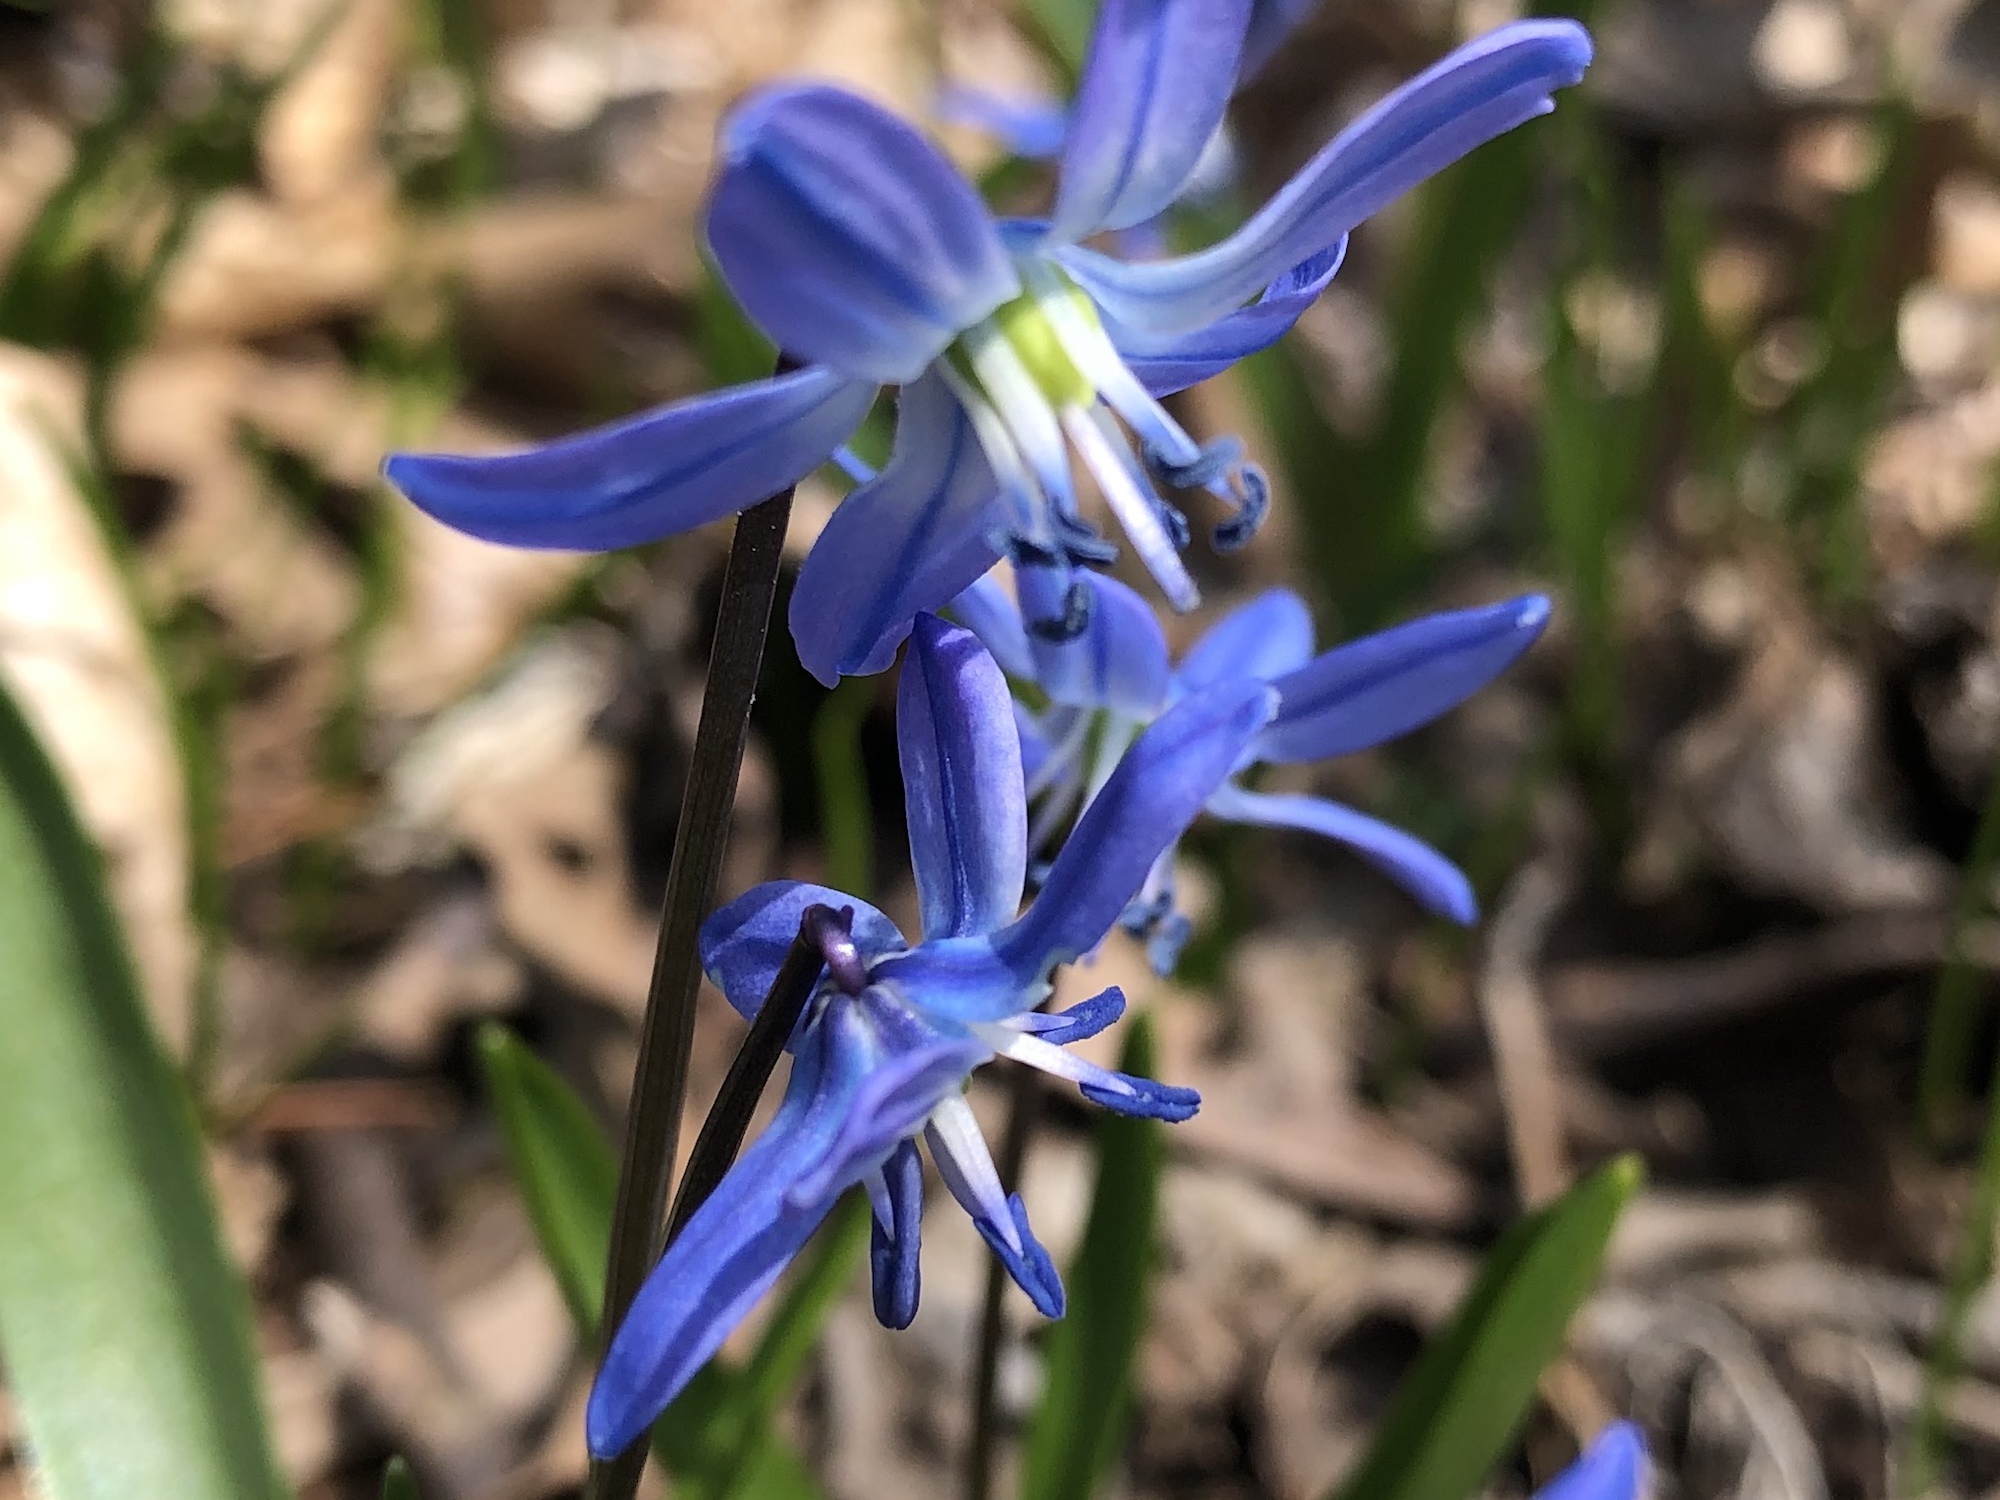 Siberian Squill in woods between Oak Savanna and sycamore tree on April 7, 2020.